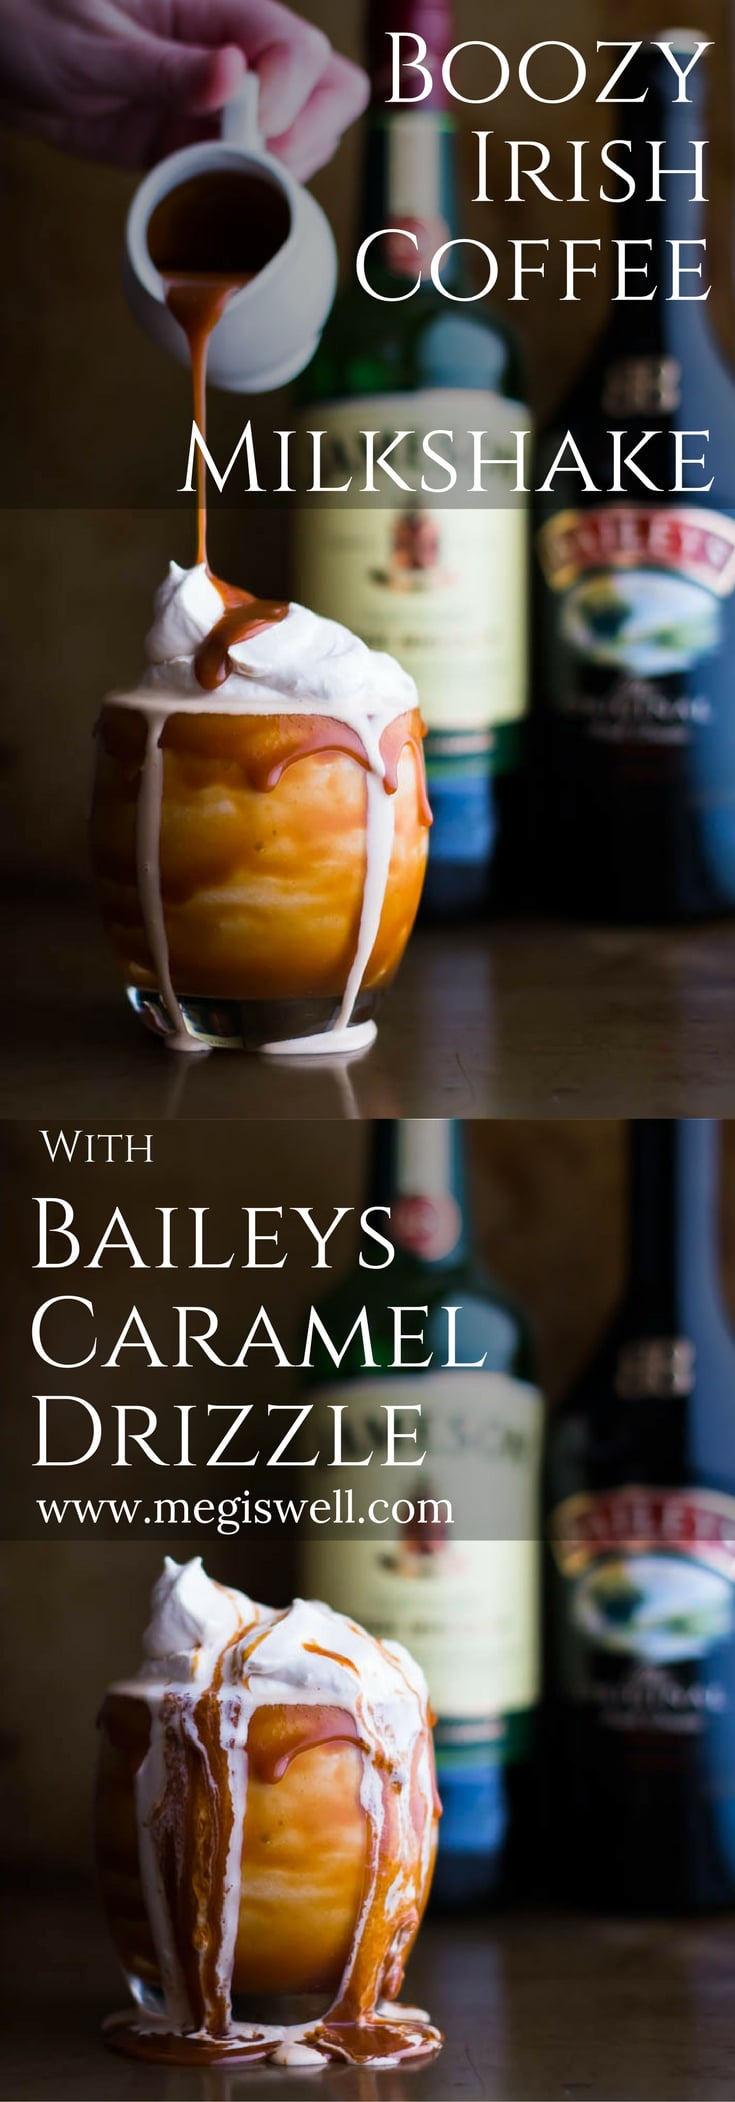 This Boozy Irish Coffee Milkshake with Baileys Caramel Drizzle is based off an Irish Coffee. Vanilla ice cream, espresso, and Jameson whiskey creates that Irish Coffee taste while Baileys caramel sauce and whipped cream enhance the flavor and increase the wow factor. | www.megiswell.com